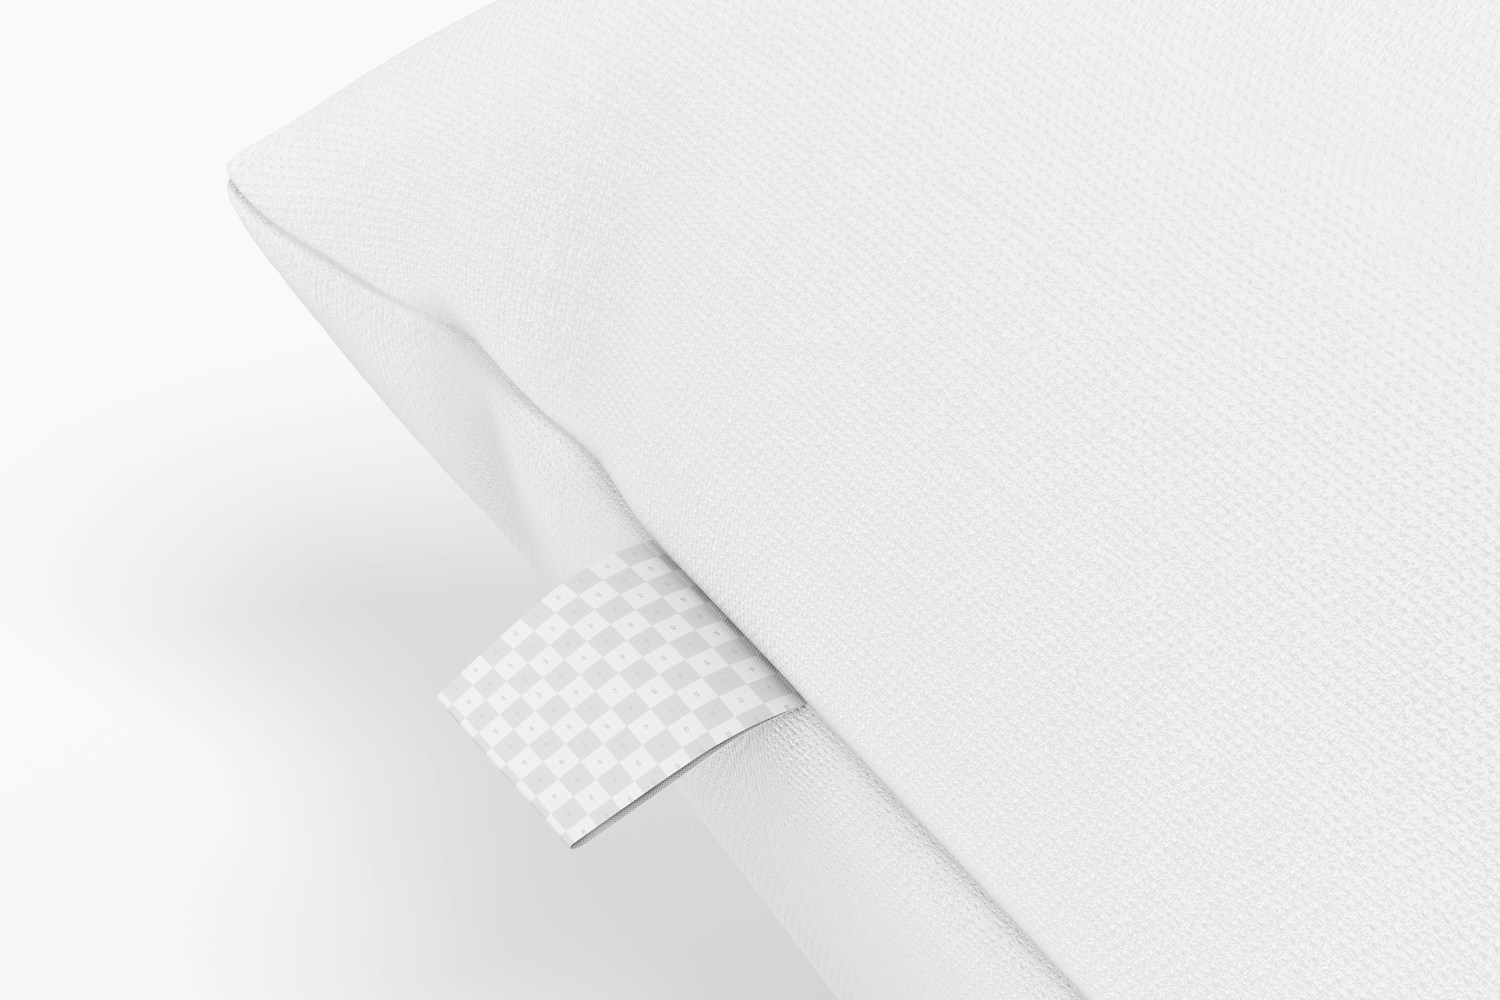 Square Clothing Tag on Pillow Mockup